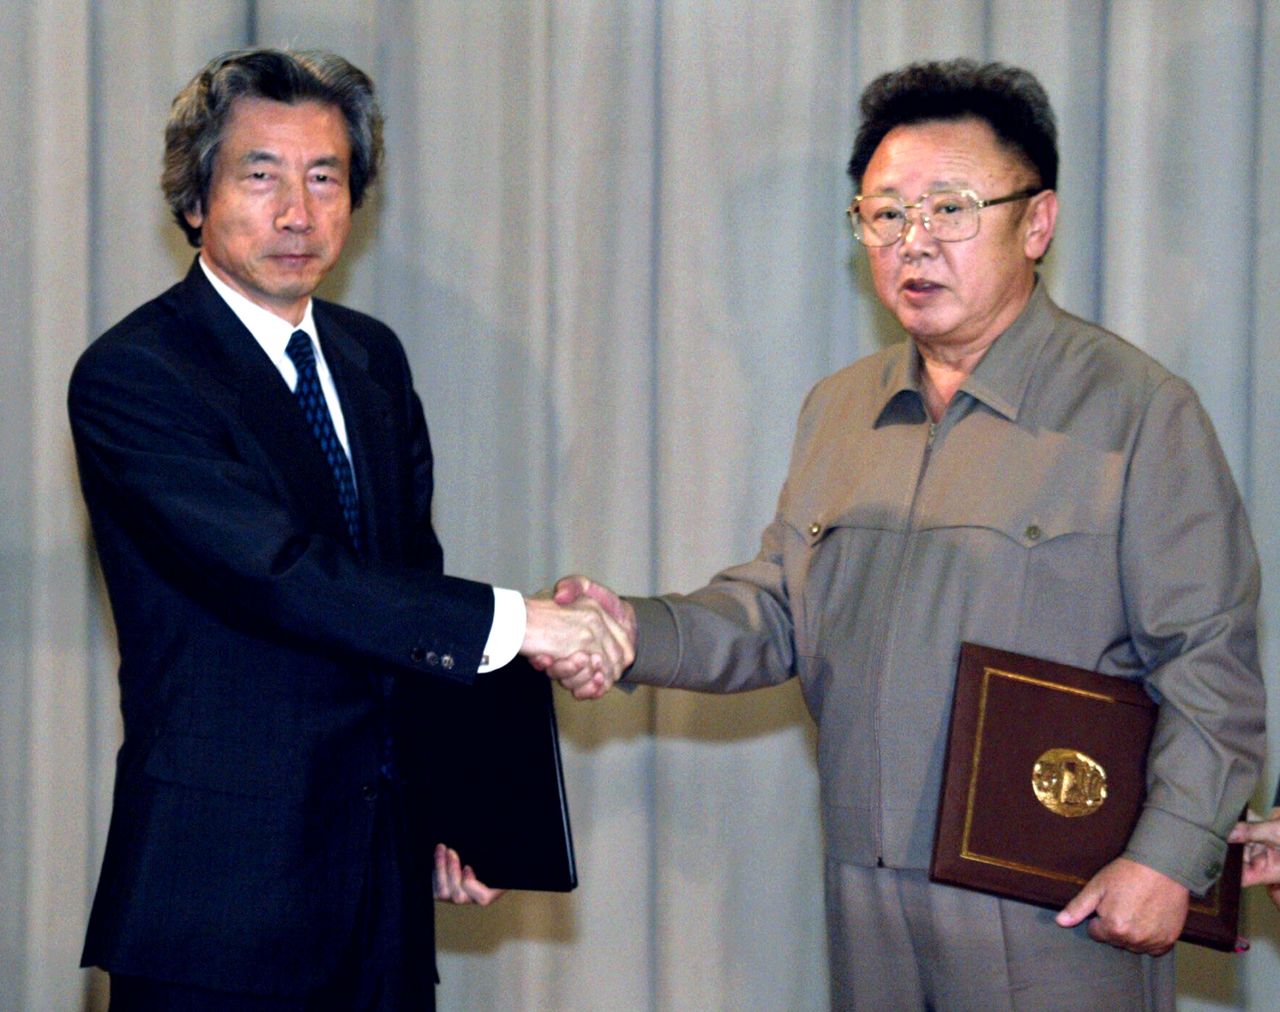 Prime Minister Koizumi Jun’ichirō became the first Japanese prime minister to visit North Korea in September 2002. (© Reuters)